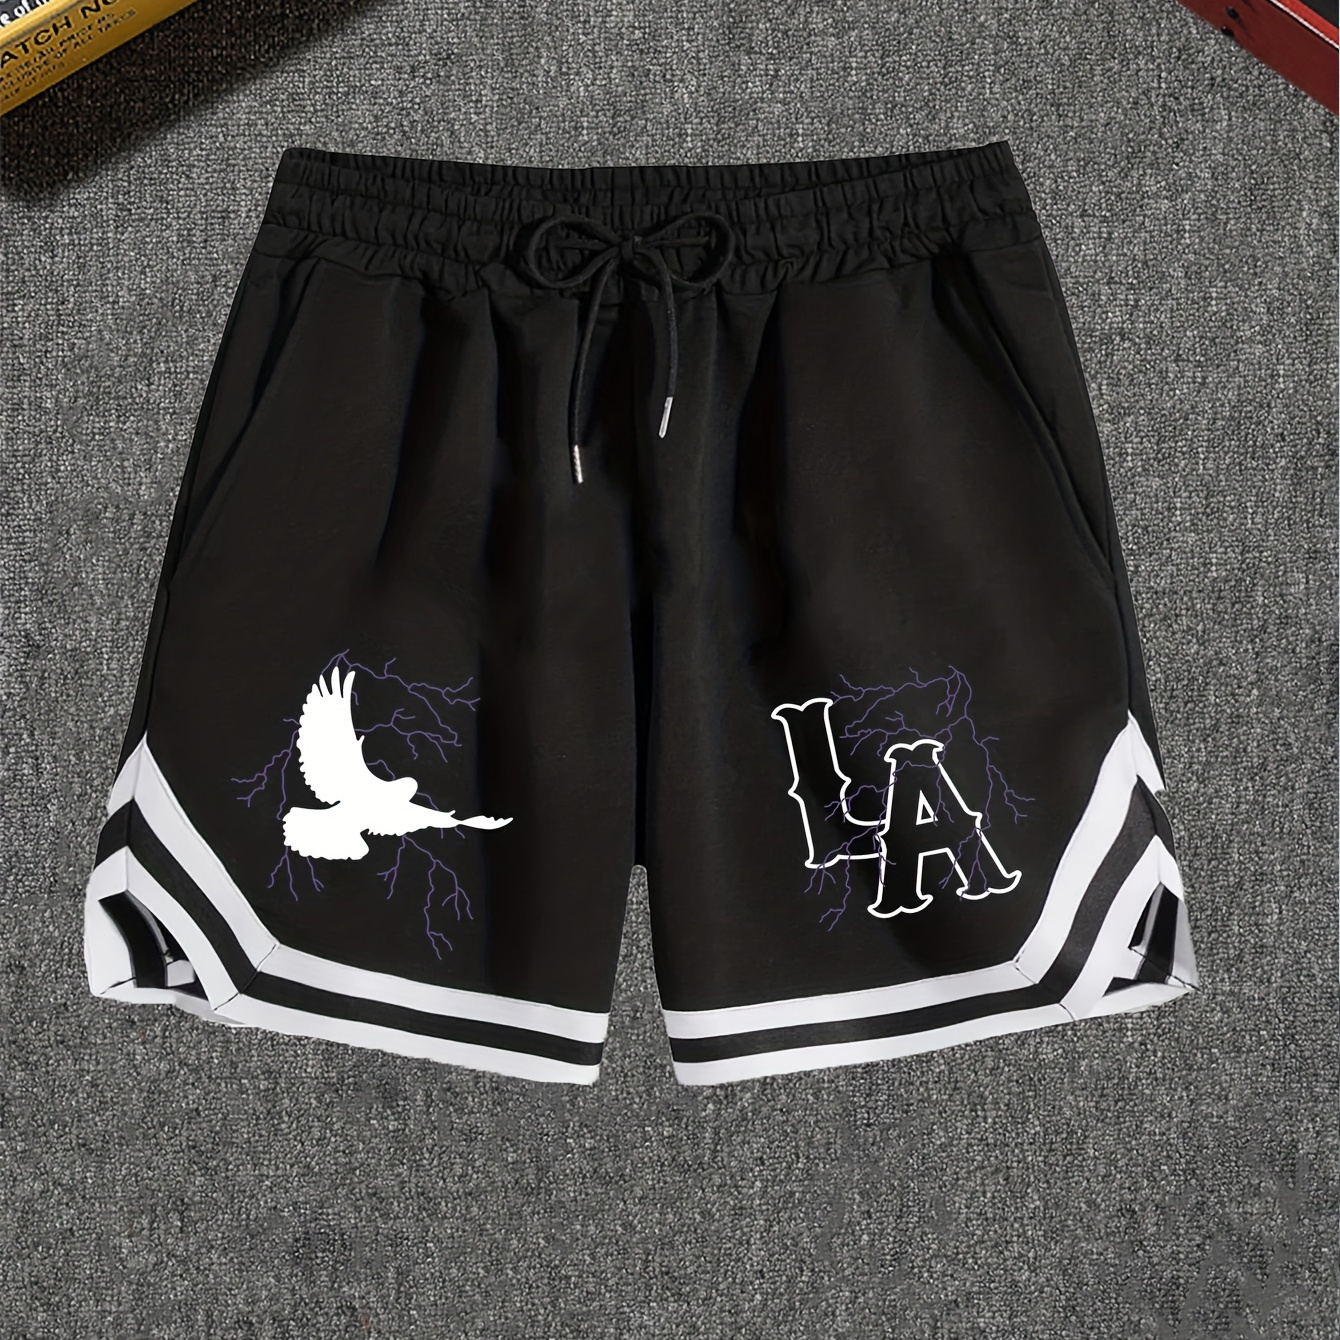 

And Lightning Pattern And Letter Print "la" Men's Sports Shorts With Drawstring And Pockets, Casual And Stylish Shorts For Summer Basketball And Fitness Wear